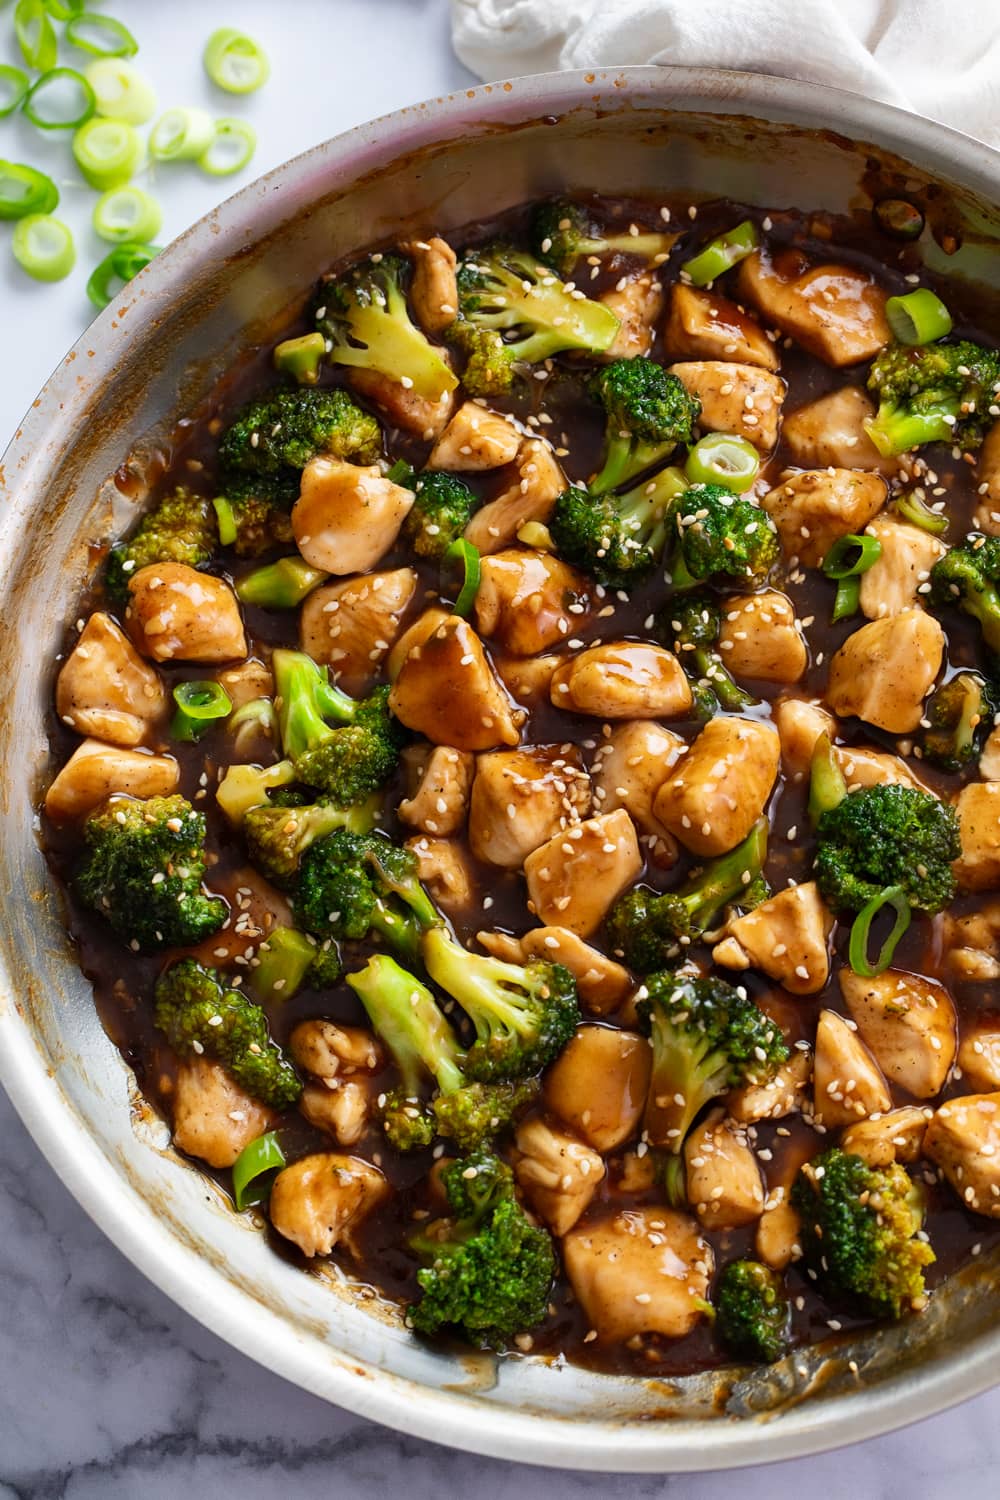 Teriyaki Chicken in a skillet with brown sauce, chicken, and broccoli.